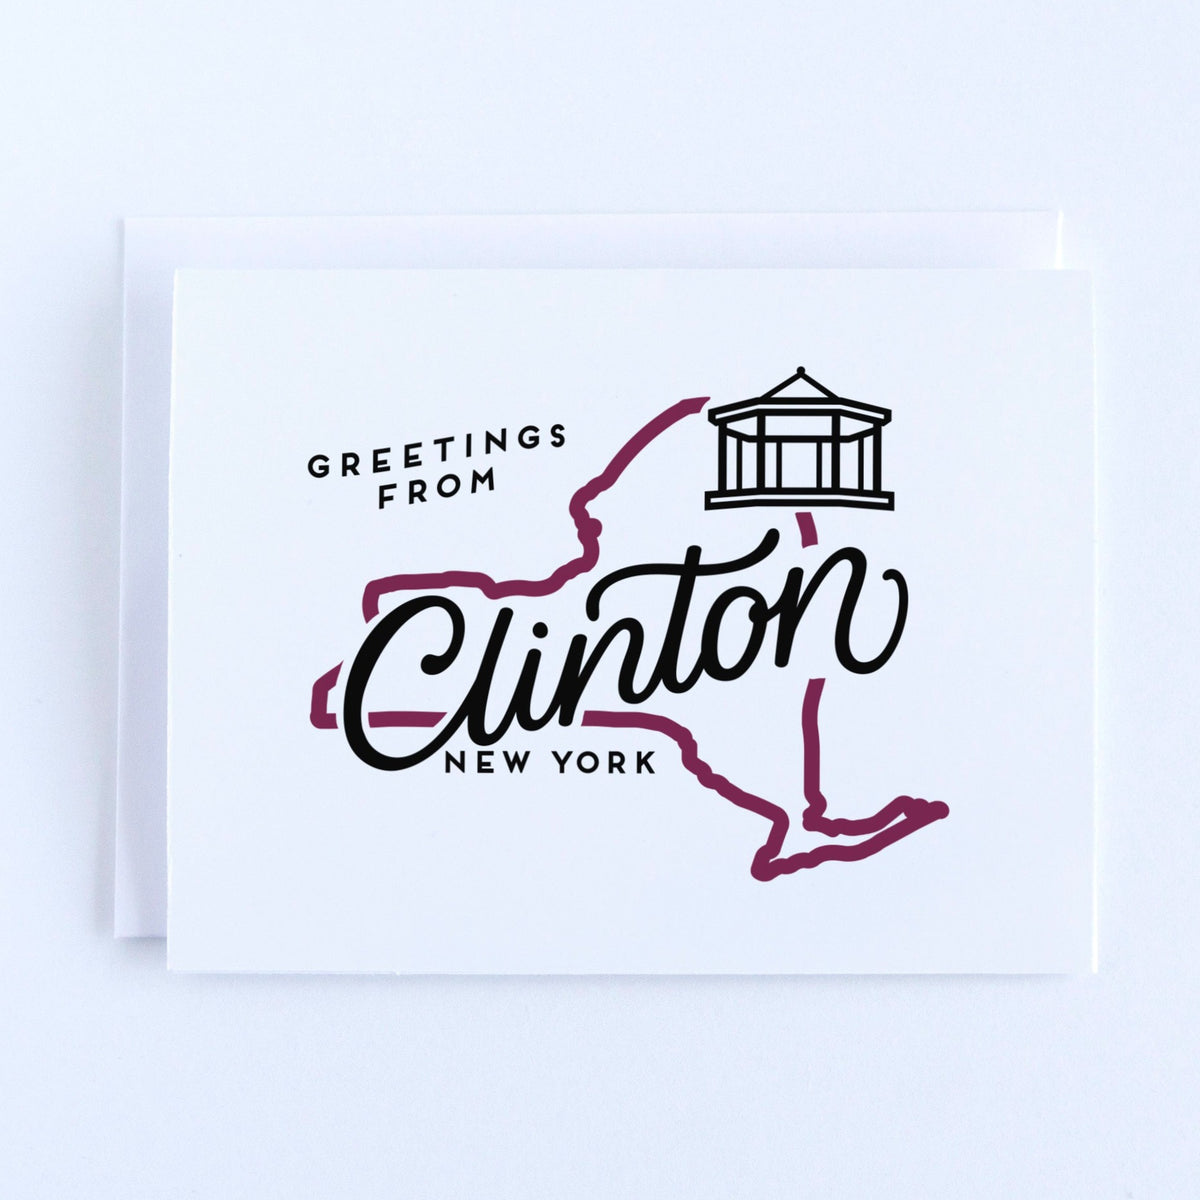 Greetings from Clinton New York Greeting Card